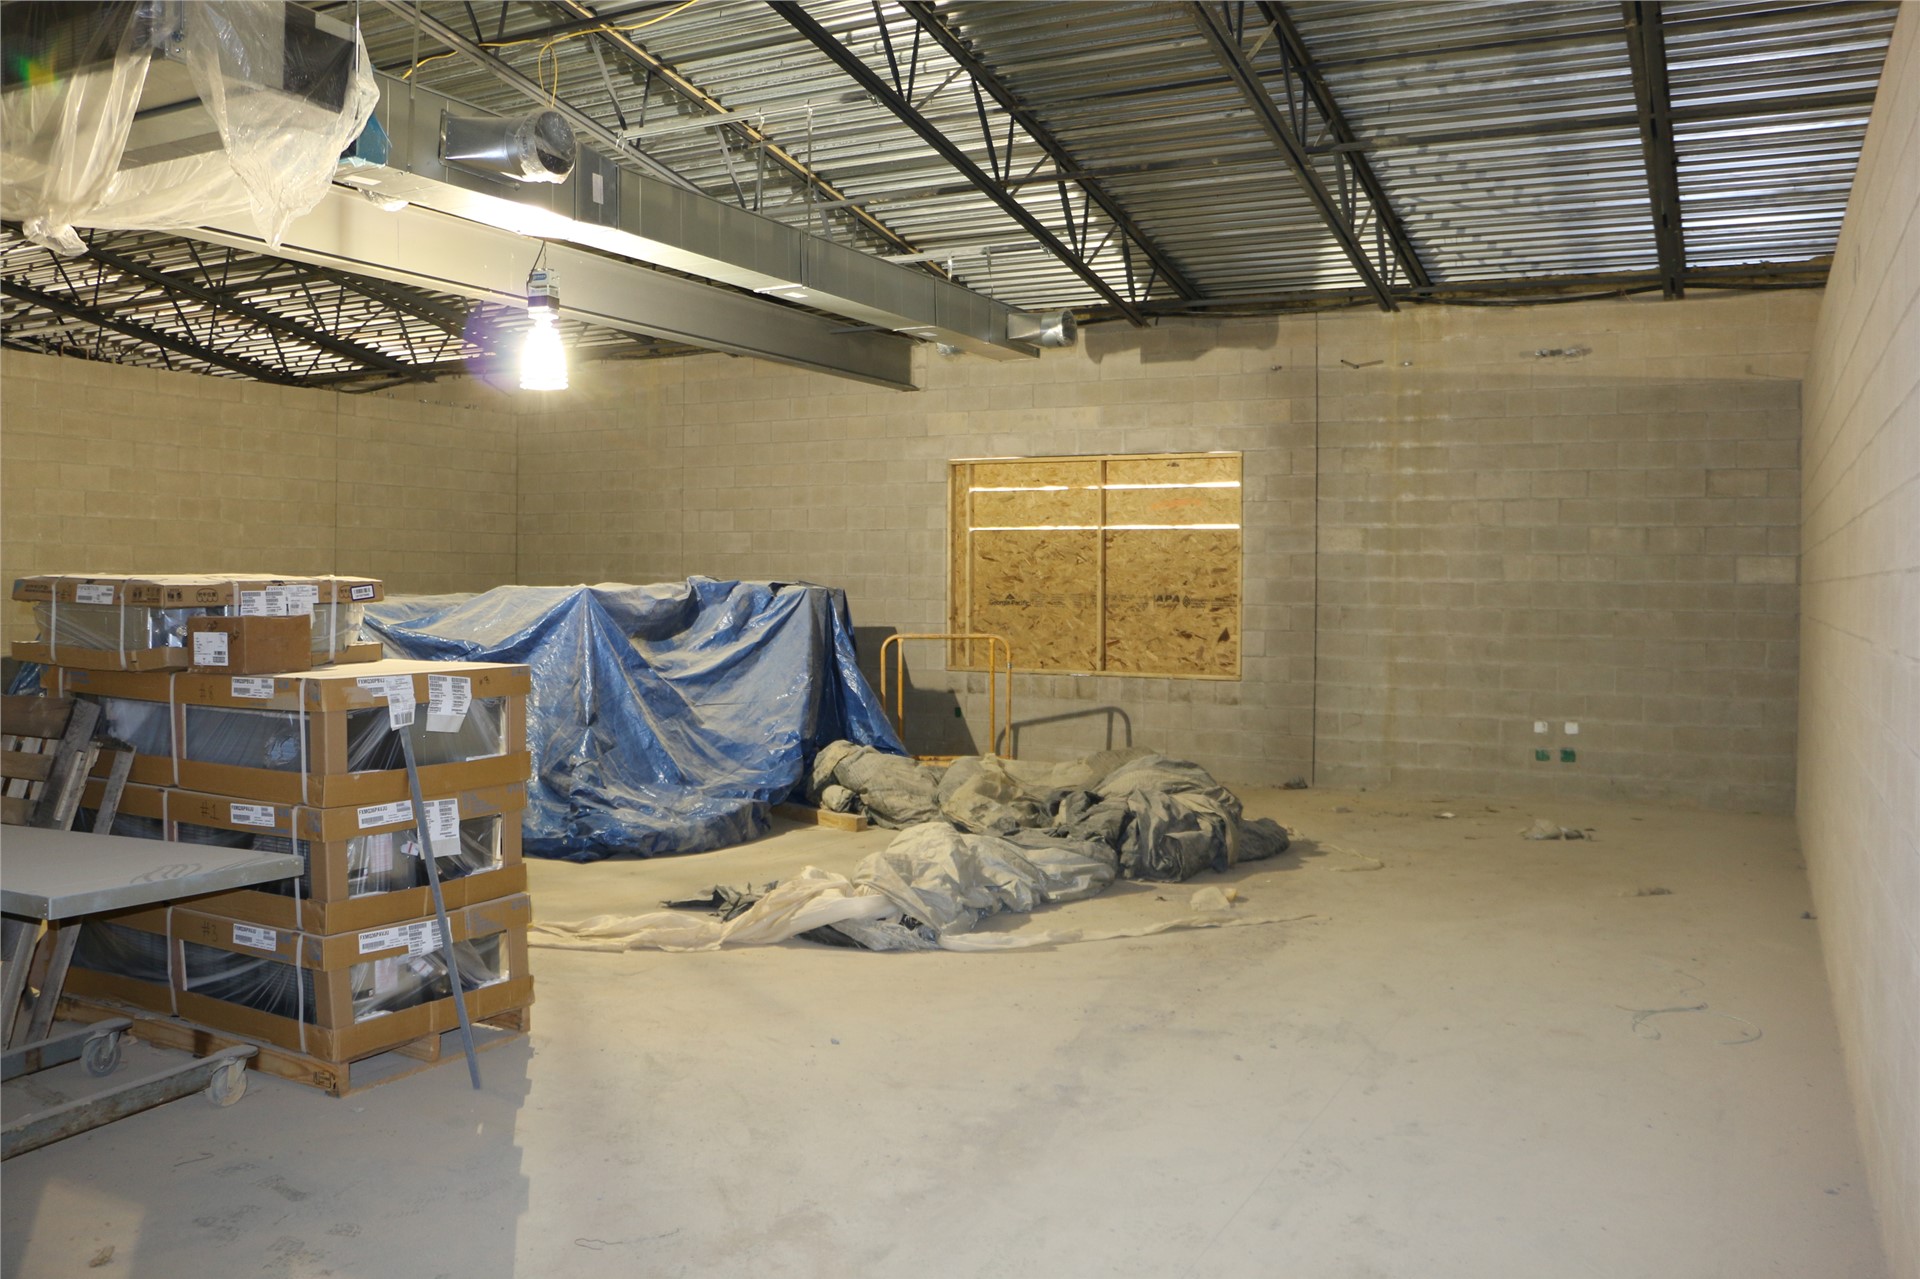 Training Room (103A) on left and Athletic Health Care (103B) on right